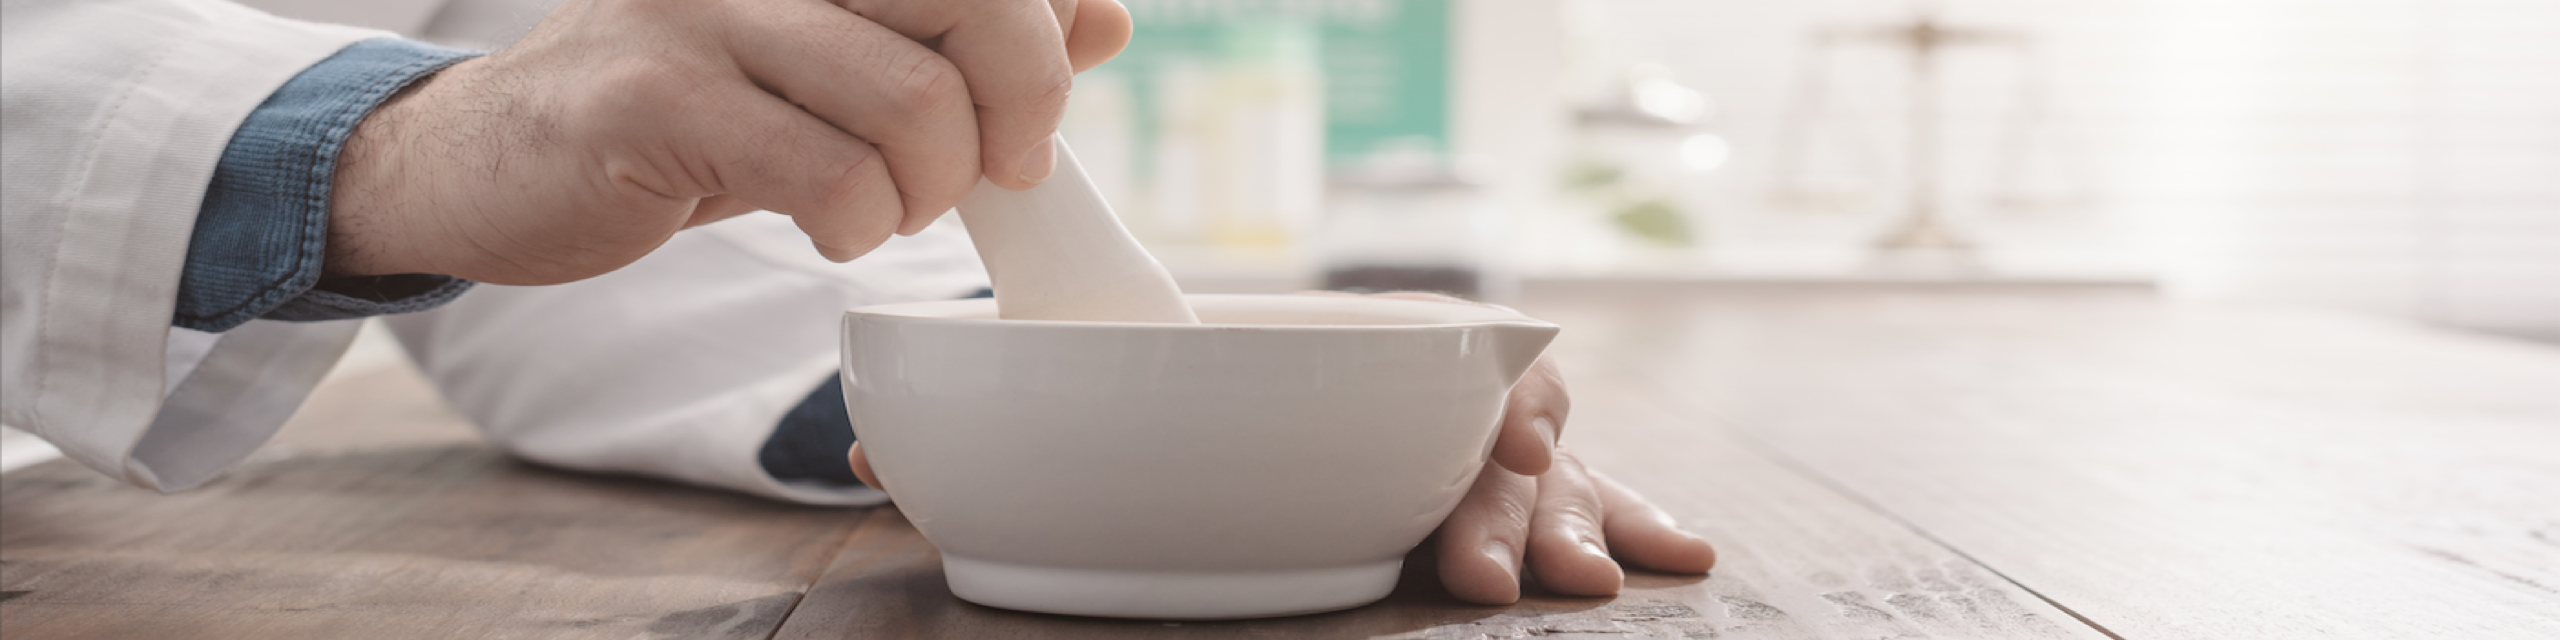 person mixing medication with mortar and pestle